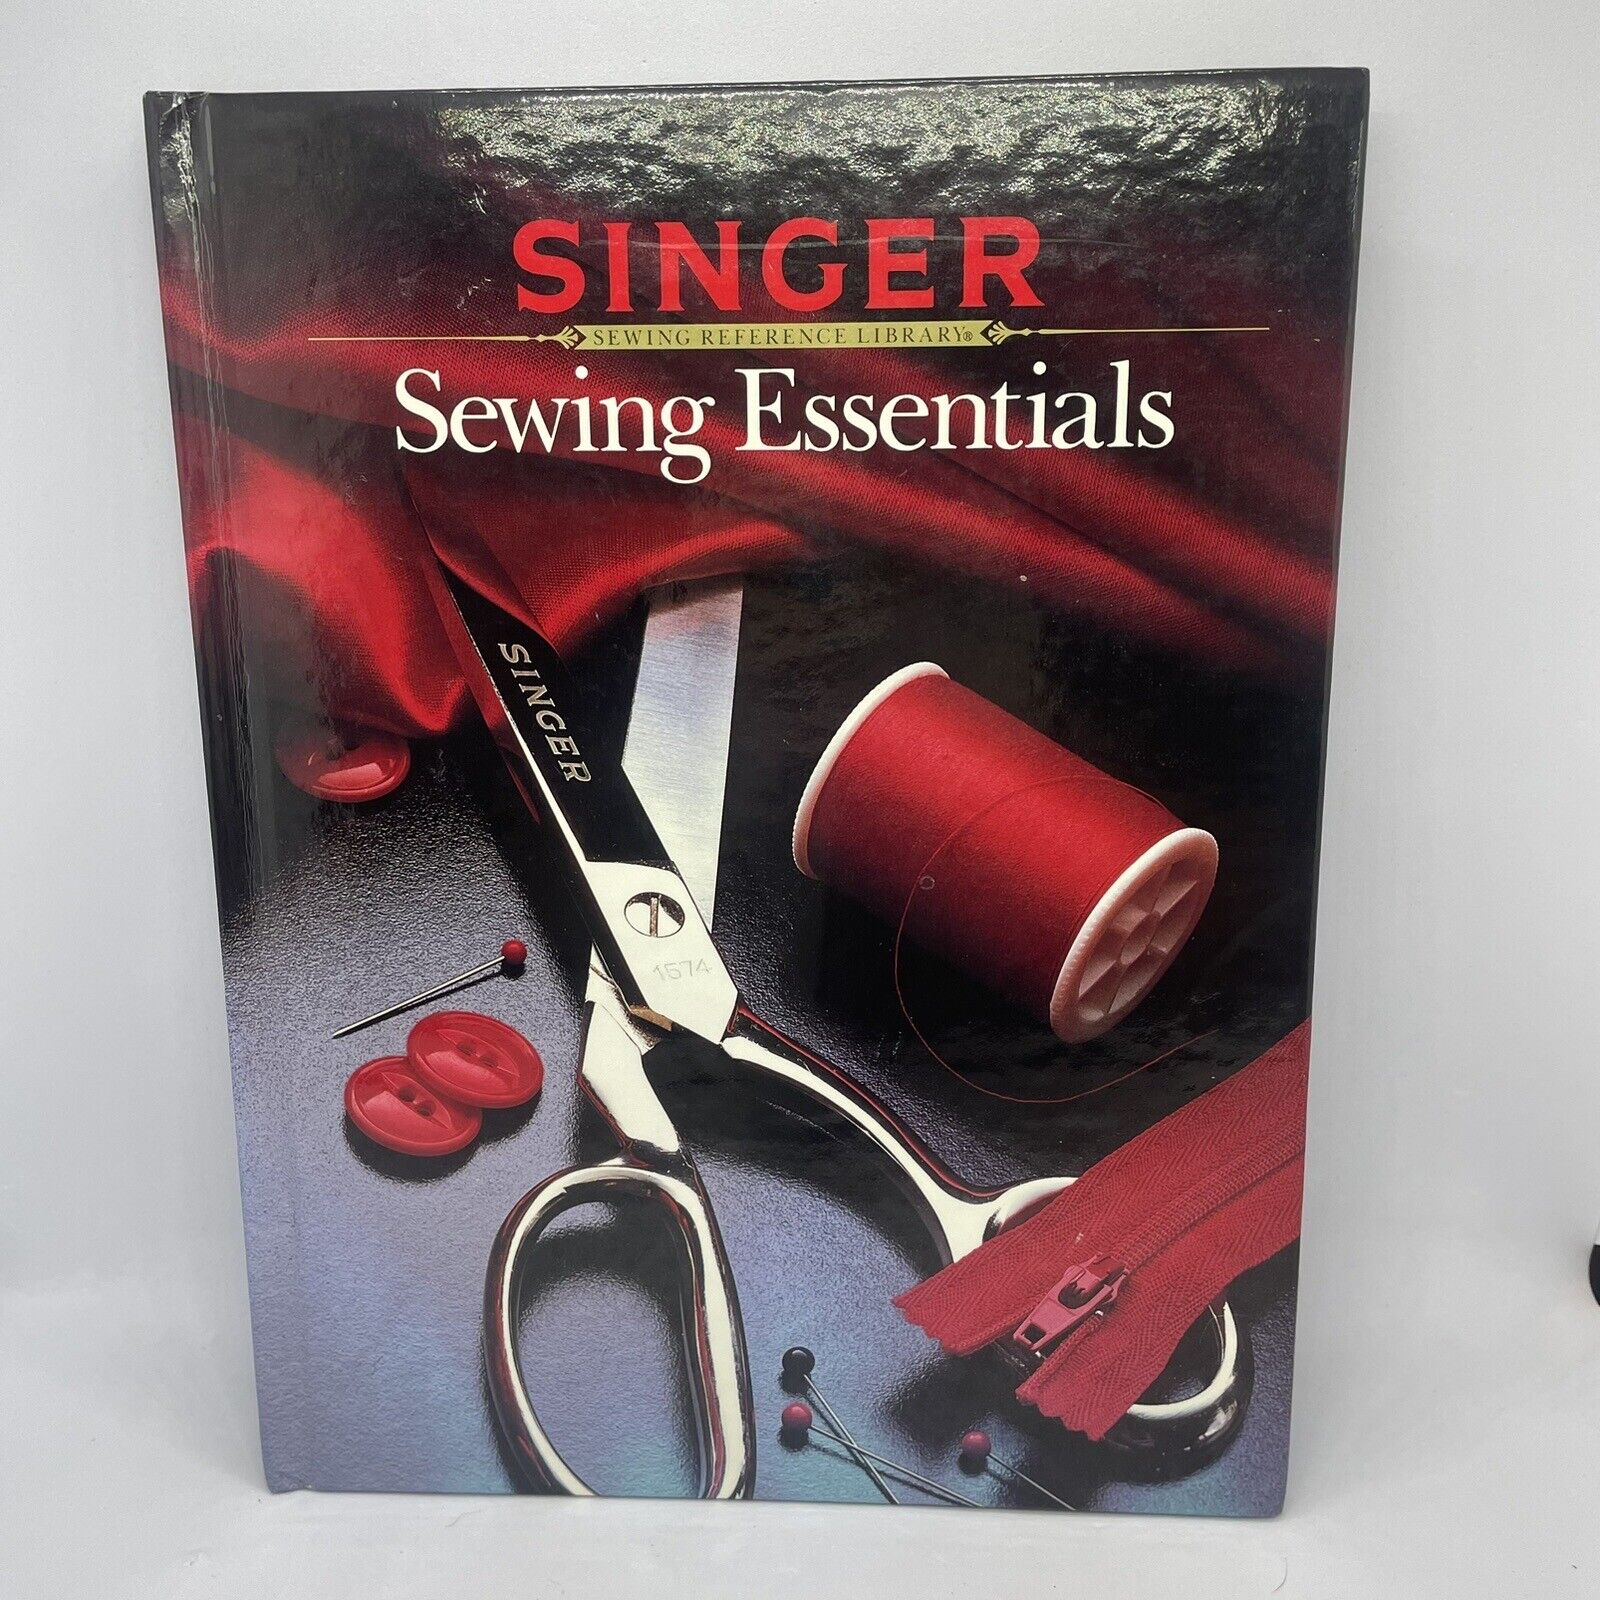 Singer Sewing Sewing Essentials Book 1984 Sewing Reference Guide